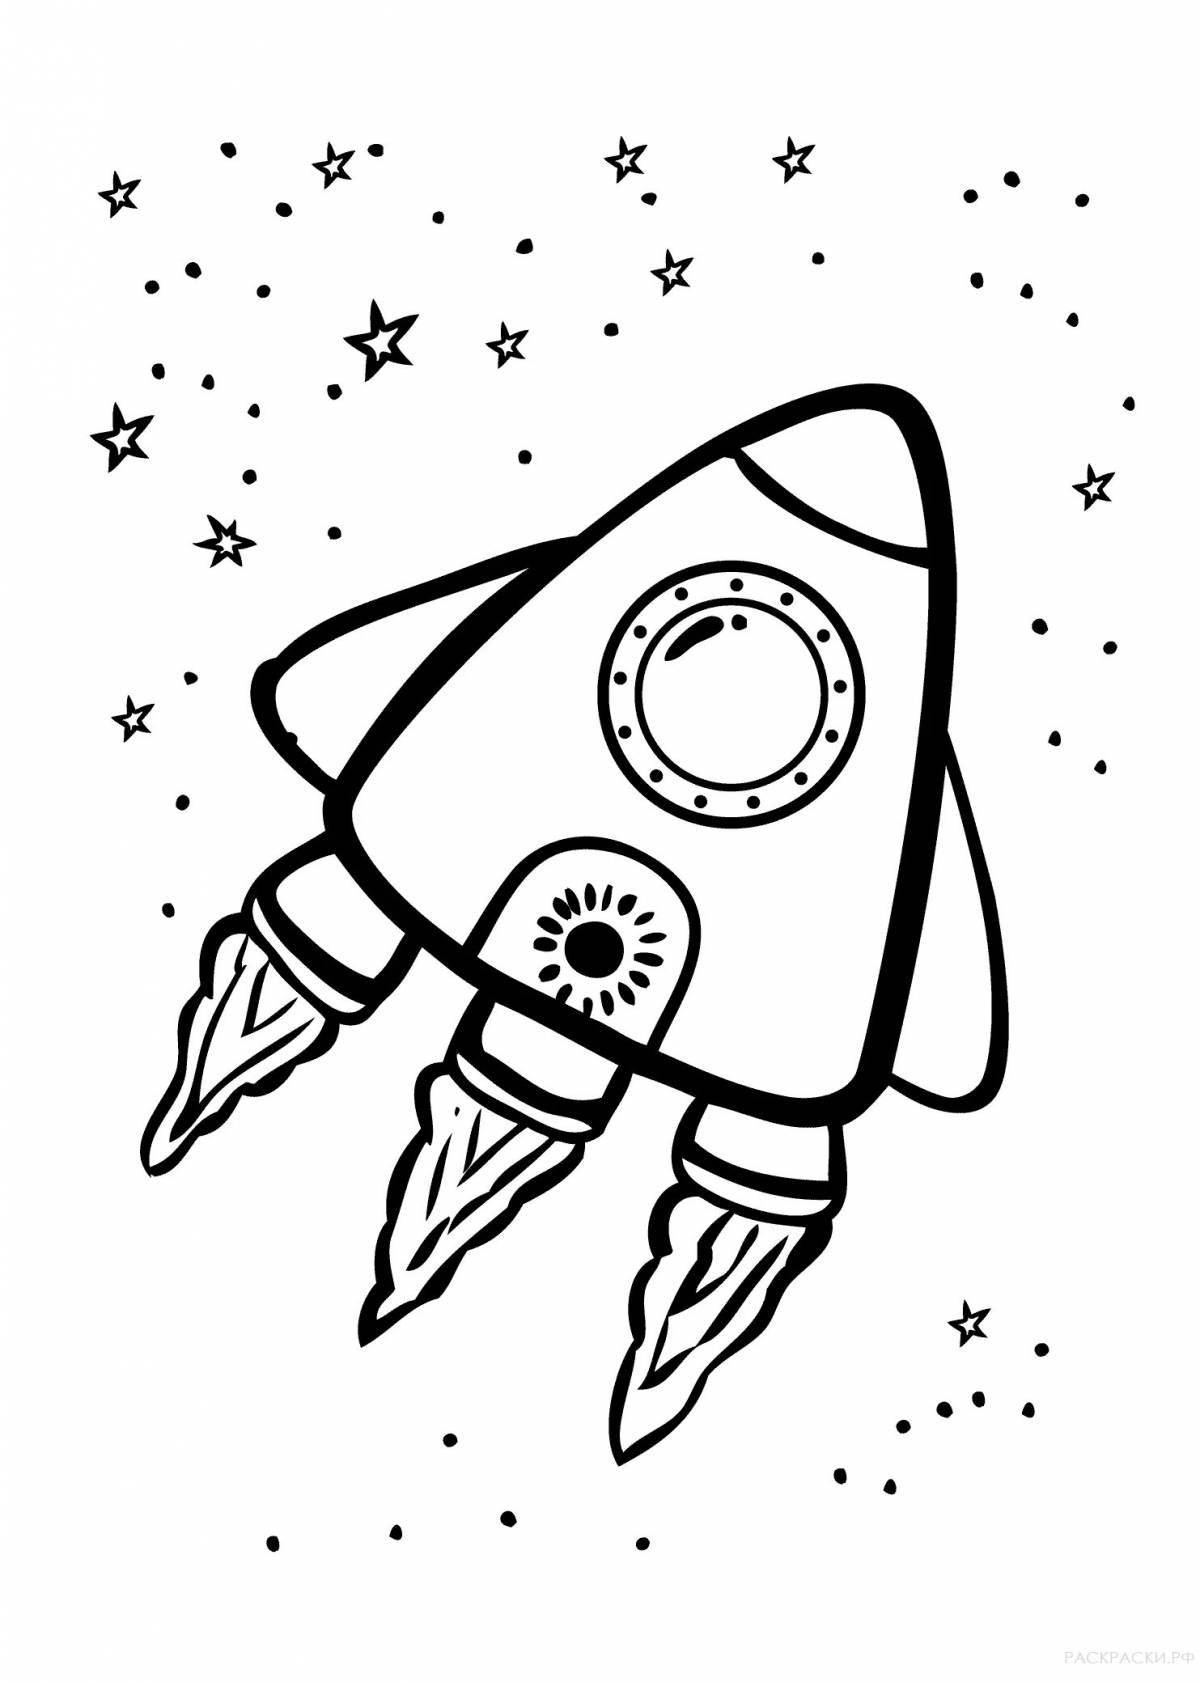 Fun rocket coloring book for 5-6 year olds